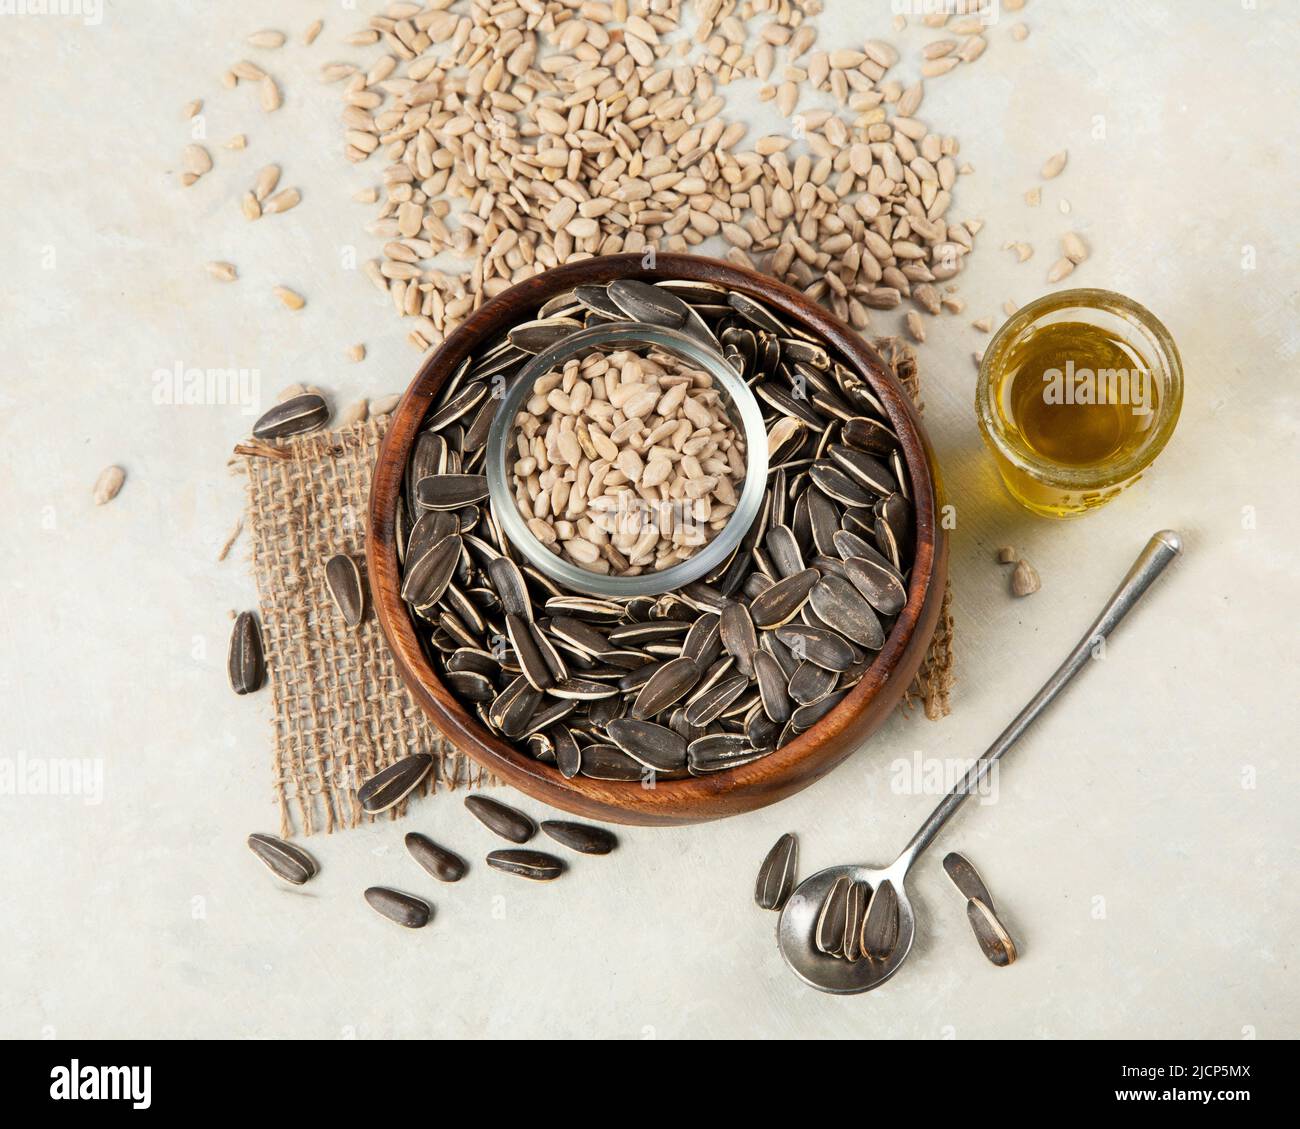 Sunflower oil and sunflower seeds on light background. Organic concept. Healthy food and fats. Top view, flat lay Stock Photo